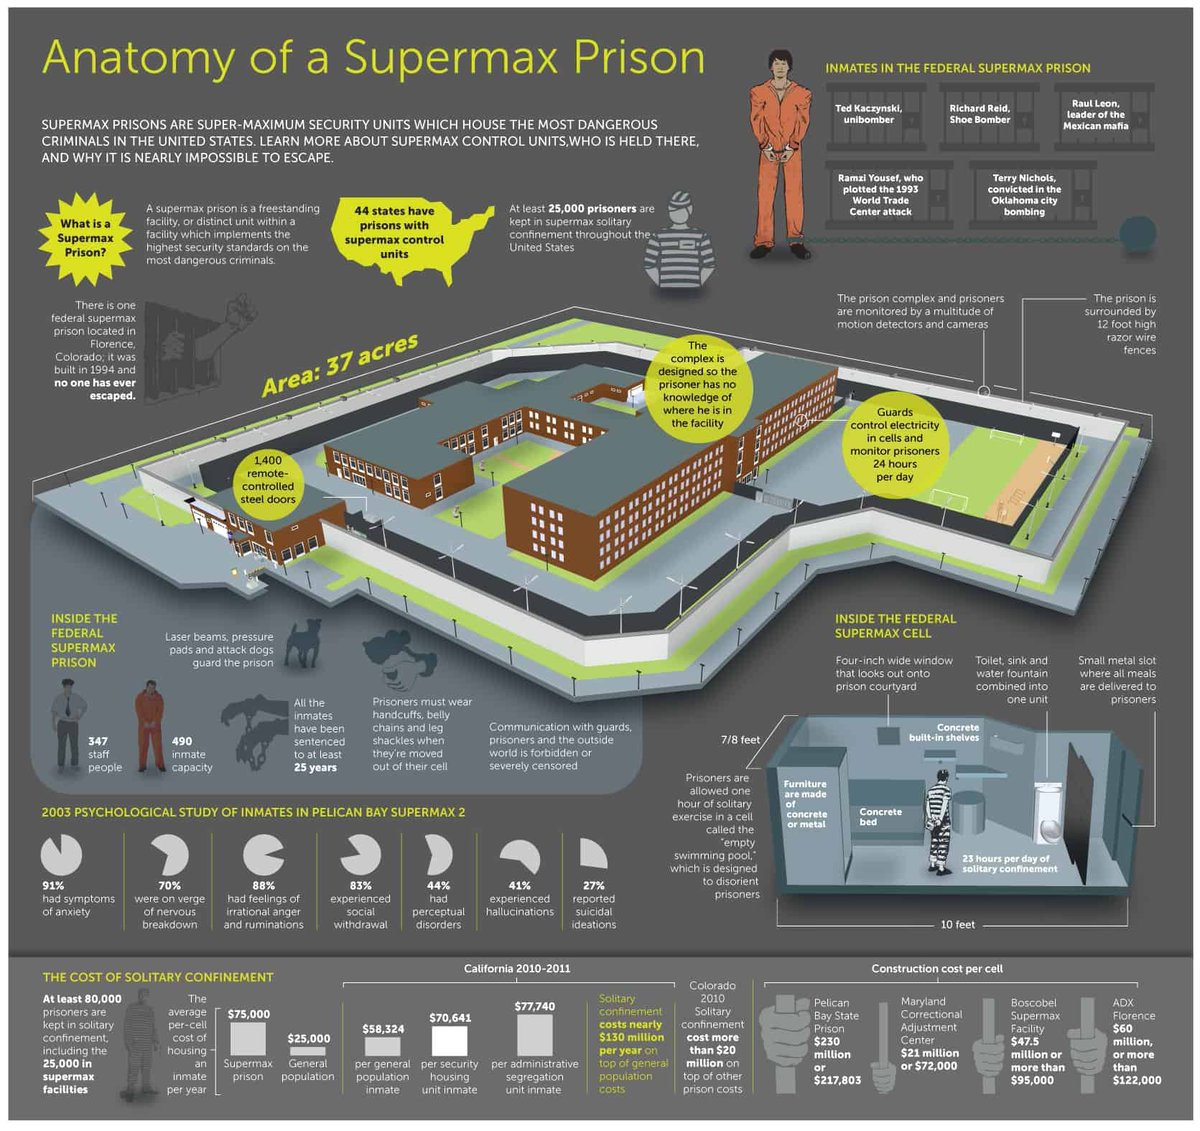 Make SuperMax Prisons Great Again.

We need more of these...MANY more.